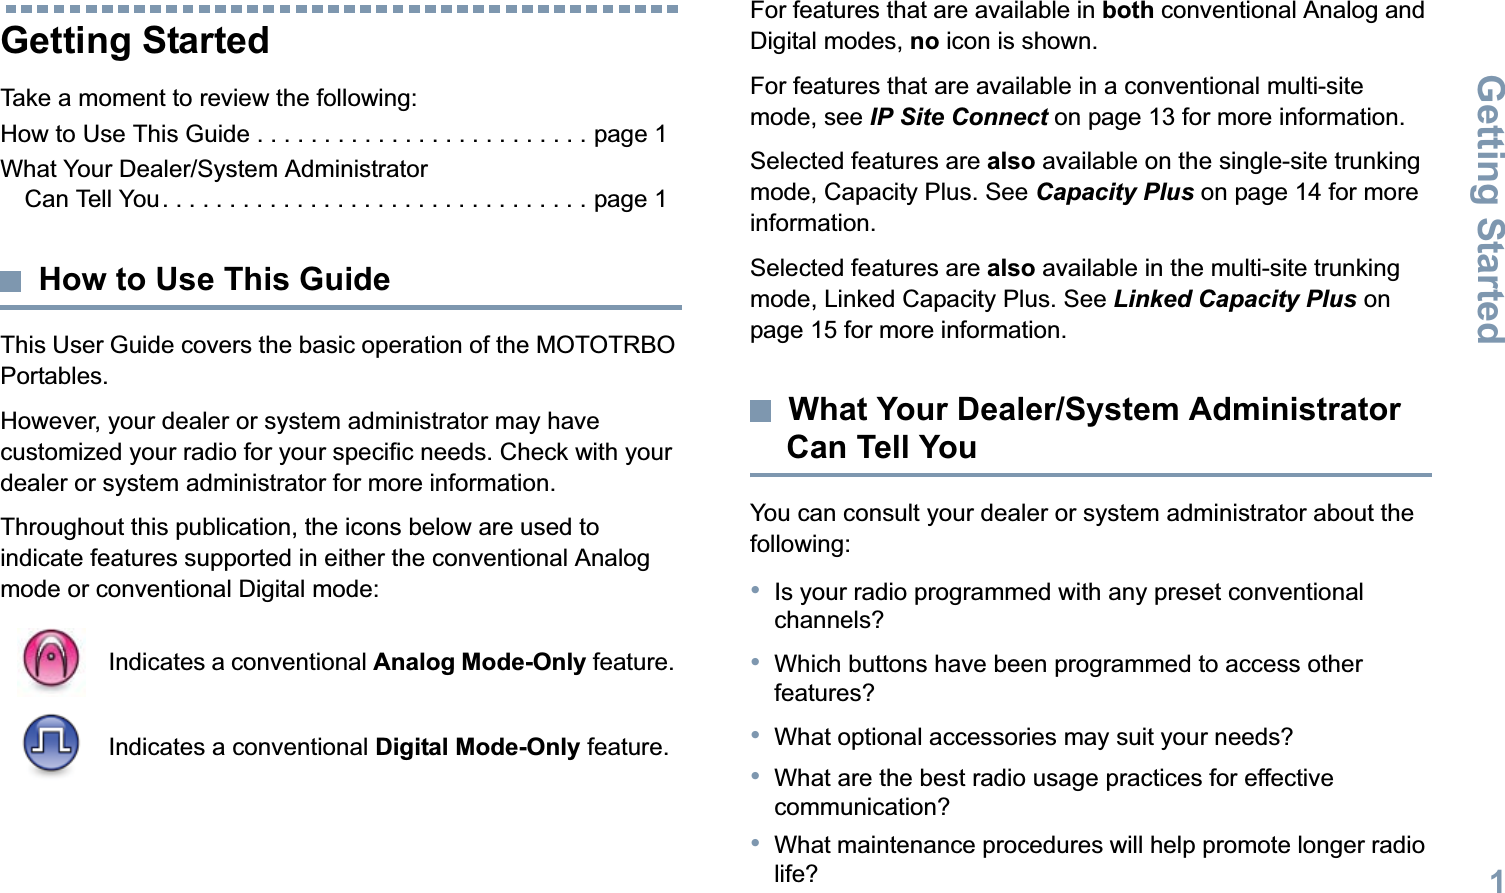 Getting StartedEnglish1Getting StartedTake a moment to review the following:How to Use This Guide . . . . . . . . . . . . . . . . . . . . . . . . . page 1What Your Dealer/System Administrator Can Tell You. . . . . . . . . . . . . . . . . . . . . . . . . . . . . . . . page 1How to Use This GuideThis User Guide covers the basic operation of the MOTOTRBO Portables.However, your dealer or system administrator may have customized your radio for your specific needs. Check with your dealer or system administrator for more information.Throughout this publication, the icons below are used to indicate features supported in either the conventional Analog mode or conventional Digital mode:For features that are available in both conventional Analog and Digital modes, no icon is shown.For features that are available in a conventional multi-site mode, see IP Site Connect on page 13 for more information.Selected features are also available on the single-site trunking mode, Capacity Plus. See Capacity Plus on page 14 for more information.Selected features are also available in the multi-site trunking mode, Linked Capacity Plus. See Linked Capacity Plus on page 15 for more information.What Your Dealer/System Administrator Can Tell YouYou can consult your dealer or system administrator about the following:•Is your radio programmed with any preset conventional channels?•Which buttons have been programmed to access other features? •What optional accessories may suit your needs?•What are the best radio usage practices for effective communication?•What maintenance procedures will help promote longer radio life?Indicates a conventional Analog Mode-Only feature.Indicates a conventional Digital Mode-Only feature.